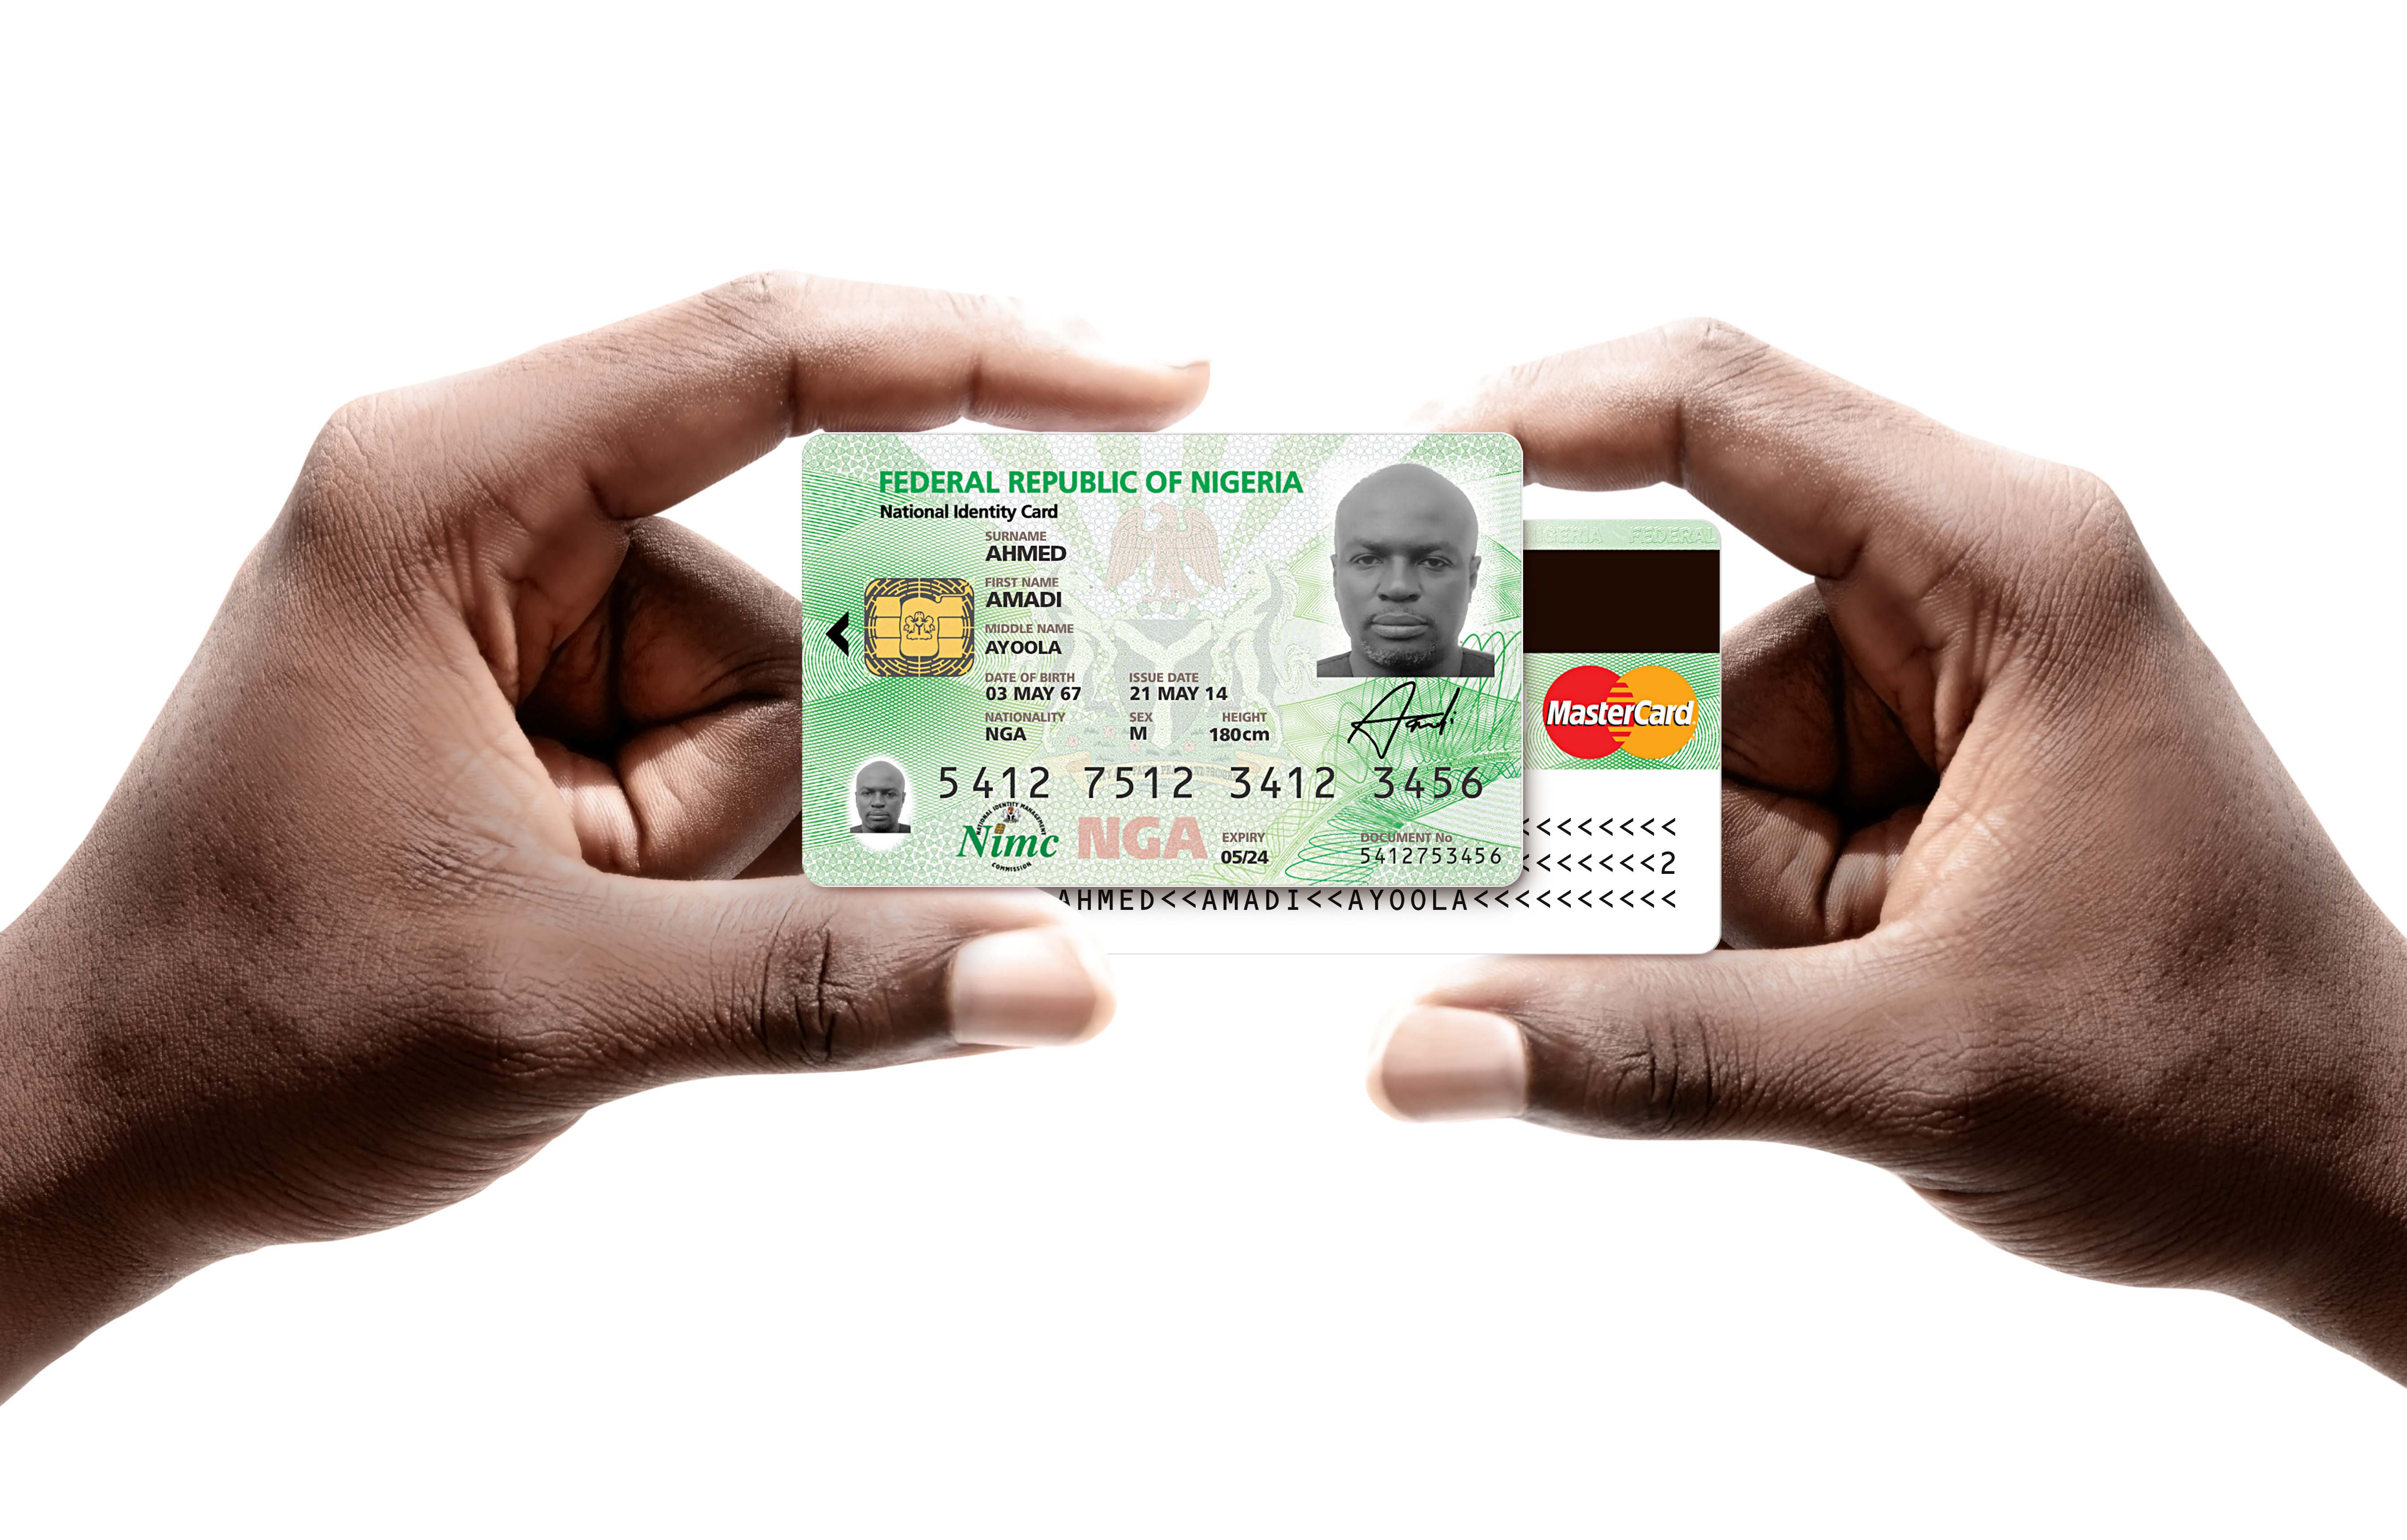 MasterCard-branded National Identity Smart Cards with electronic payment capability issued by the Nigerian National Identity Management Commission (NIMC). Photo: MasterCard